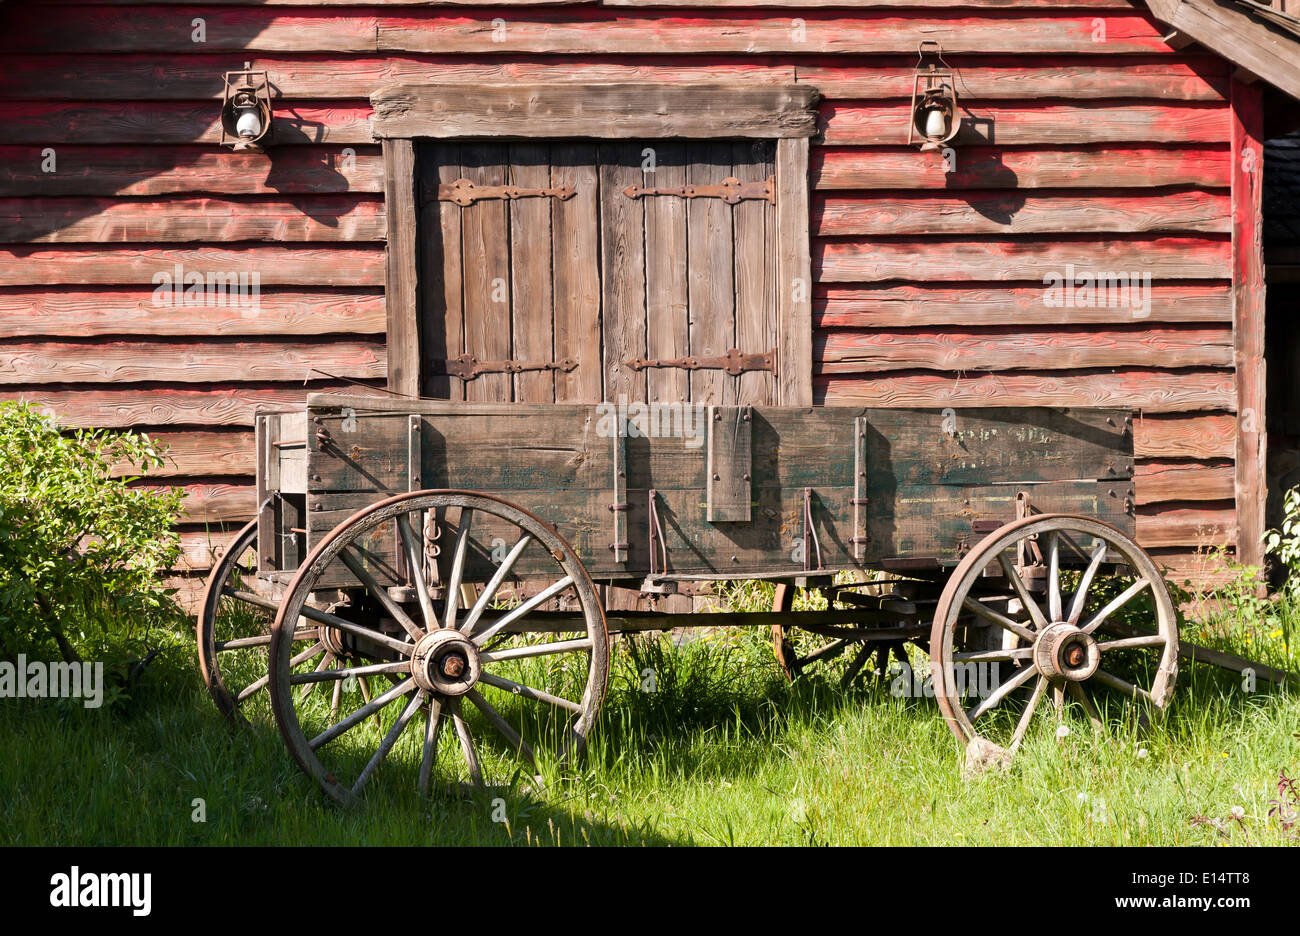 Wooden Barn and Wagon, in Frontierland, Disneyland Paris, Marne-la-Vallée, France Stock Photo